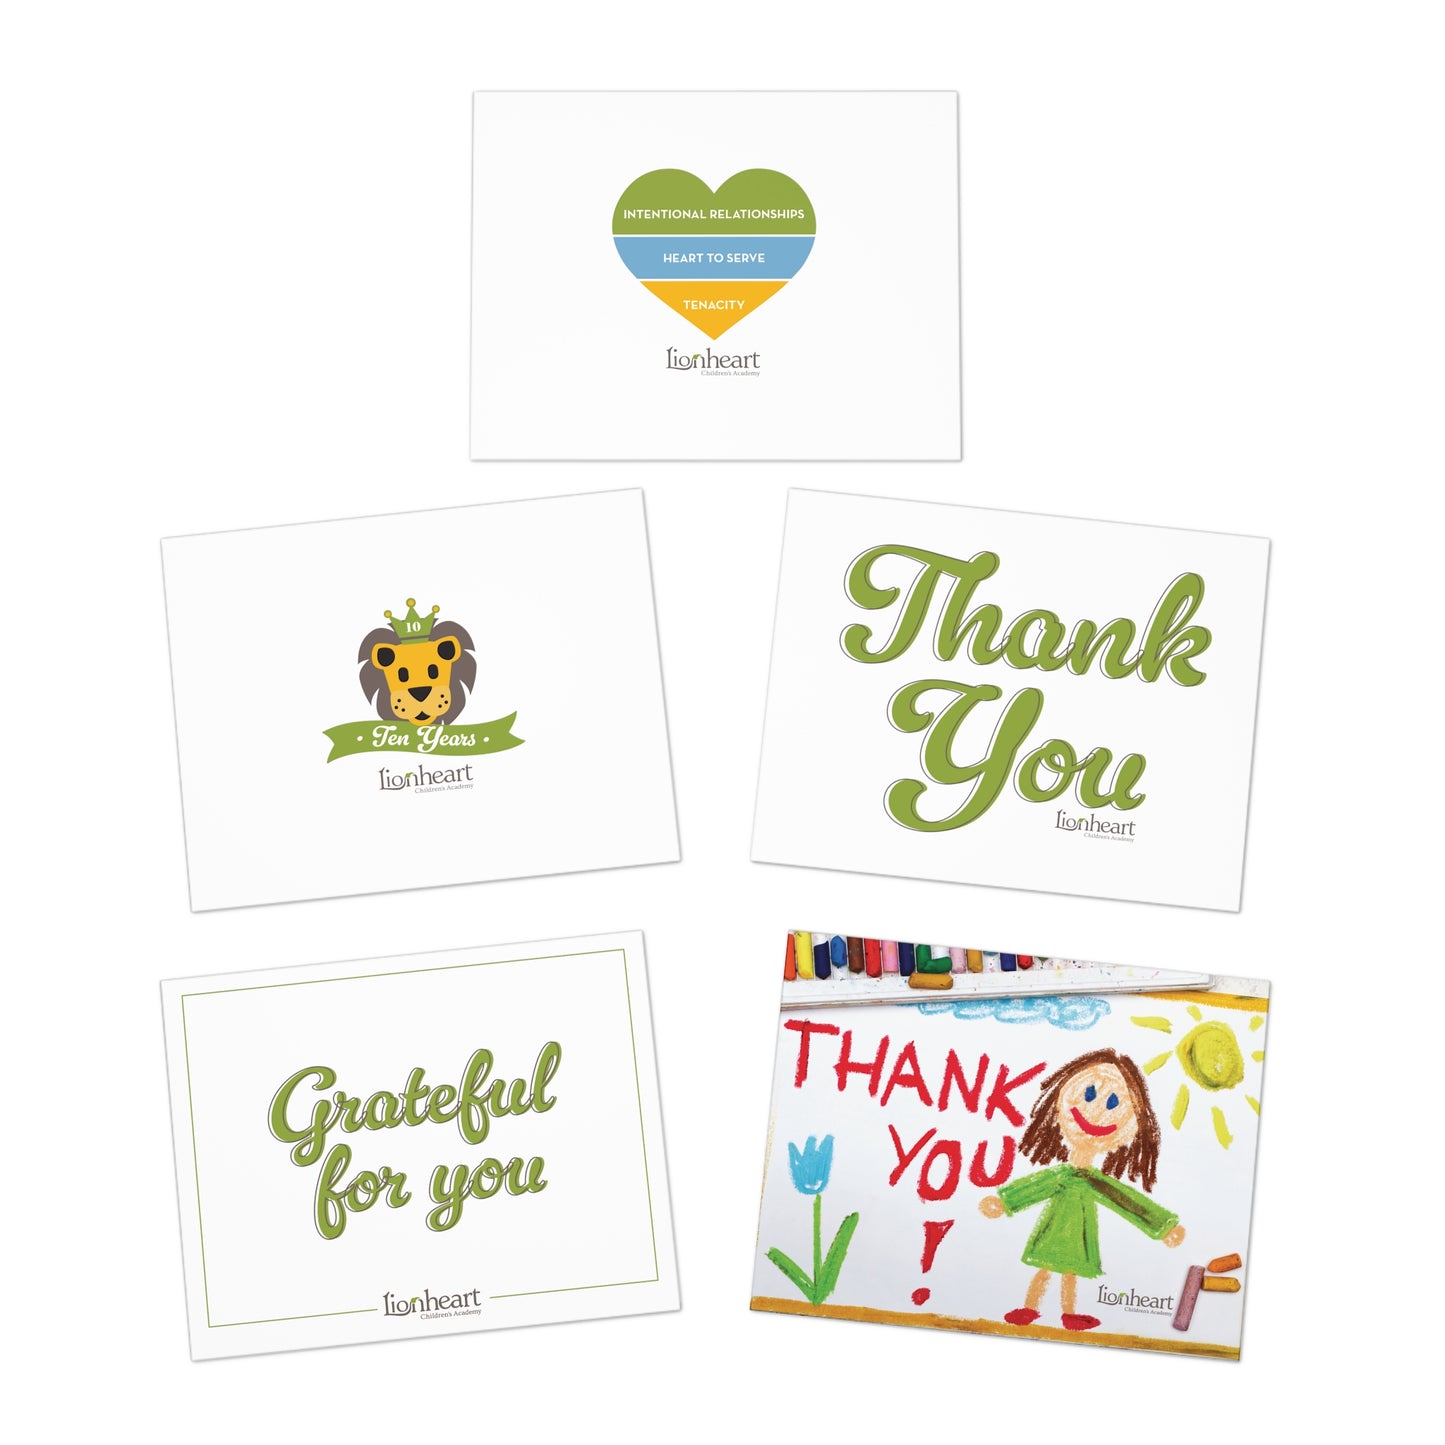 Lionheart Greeting Cards (5-Pack)